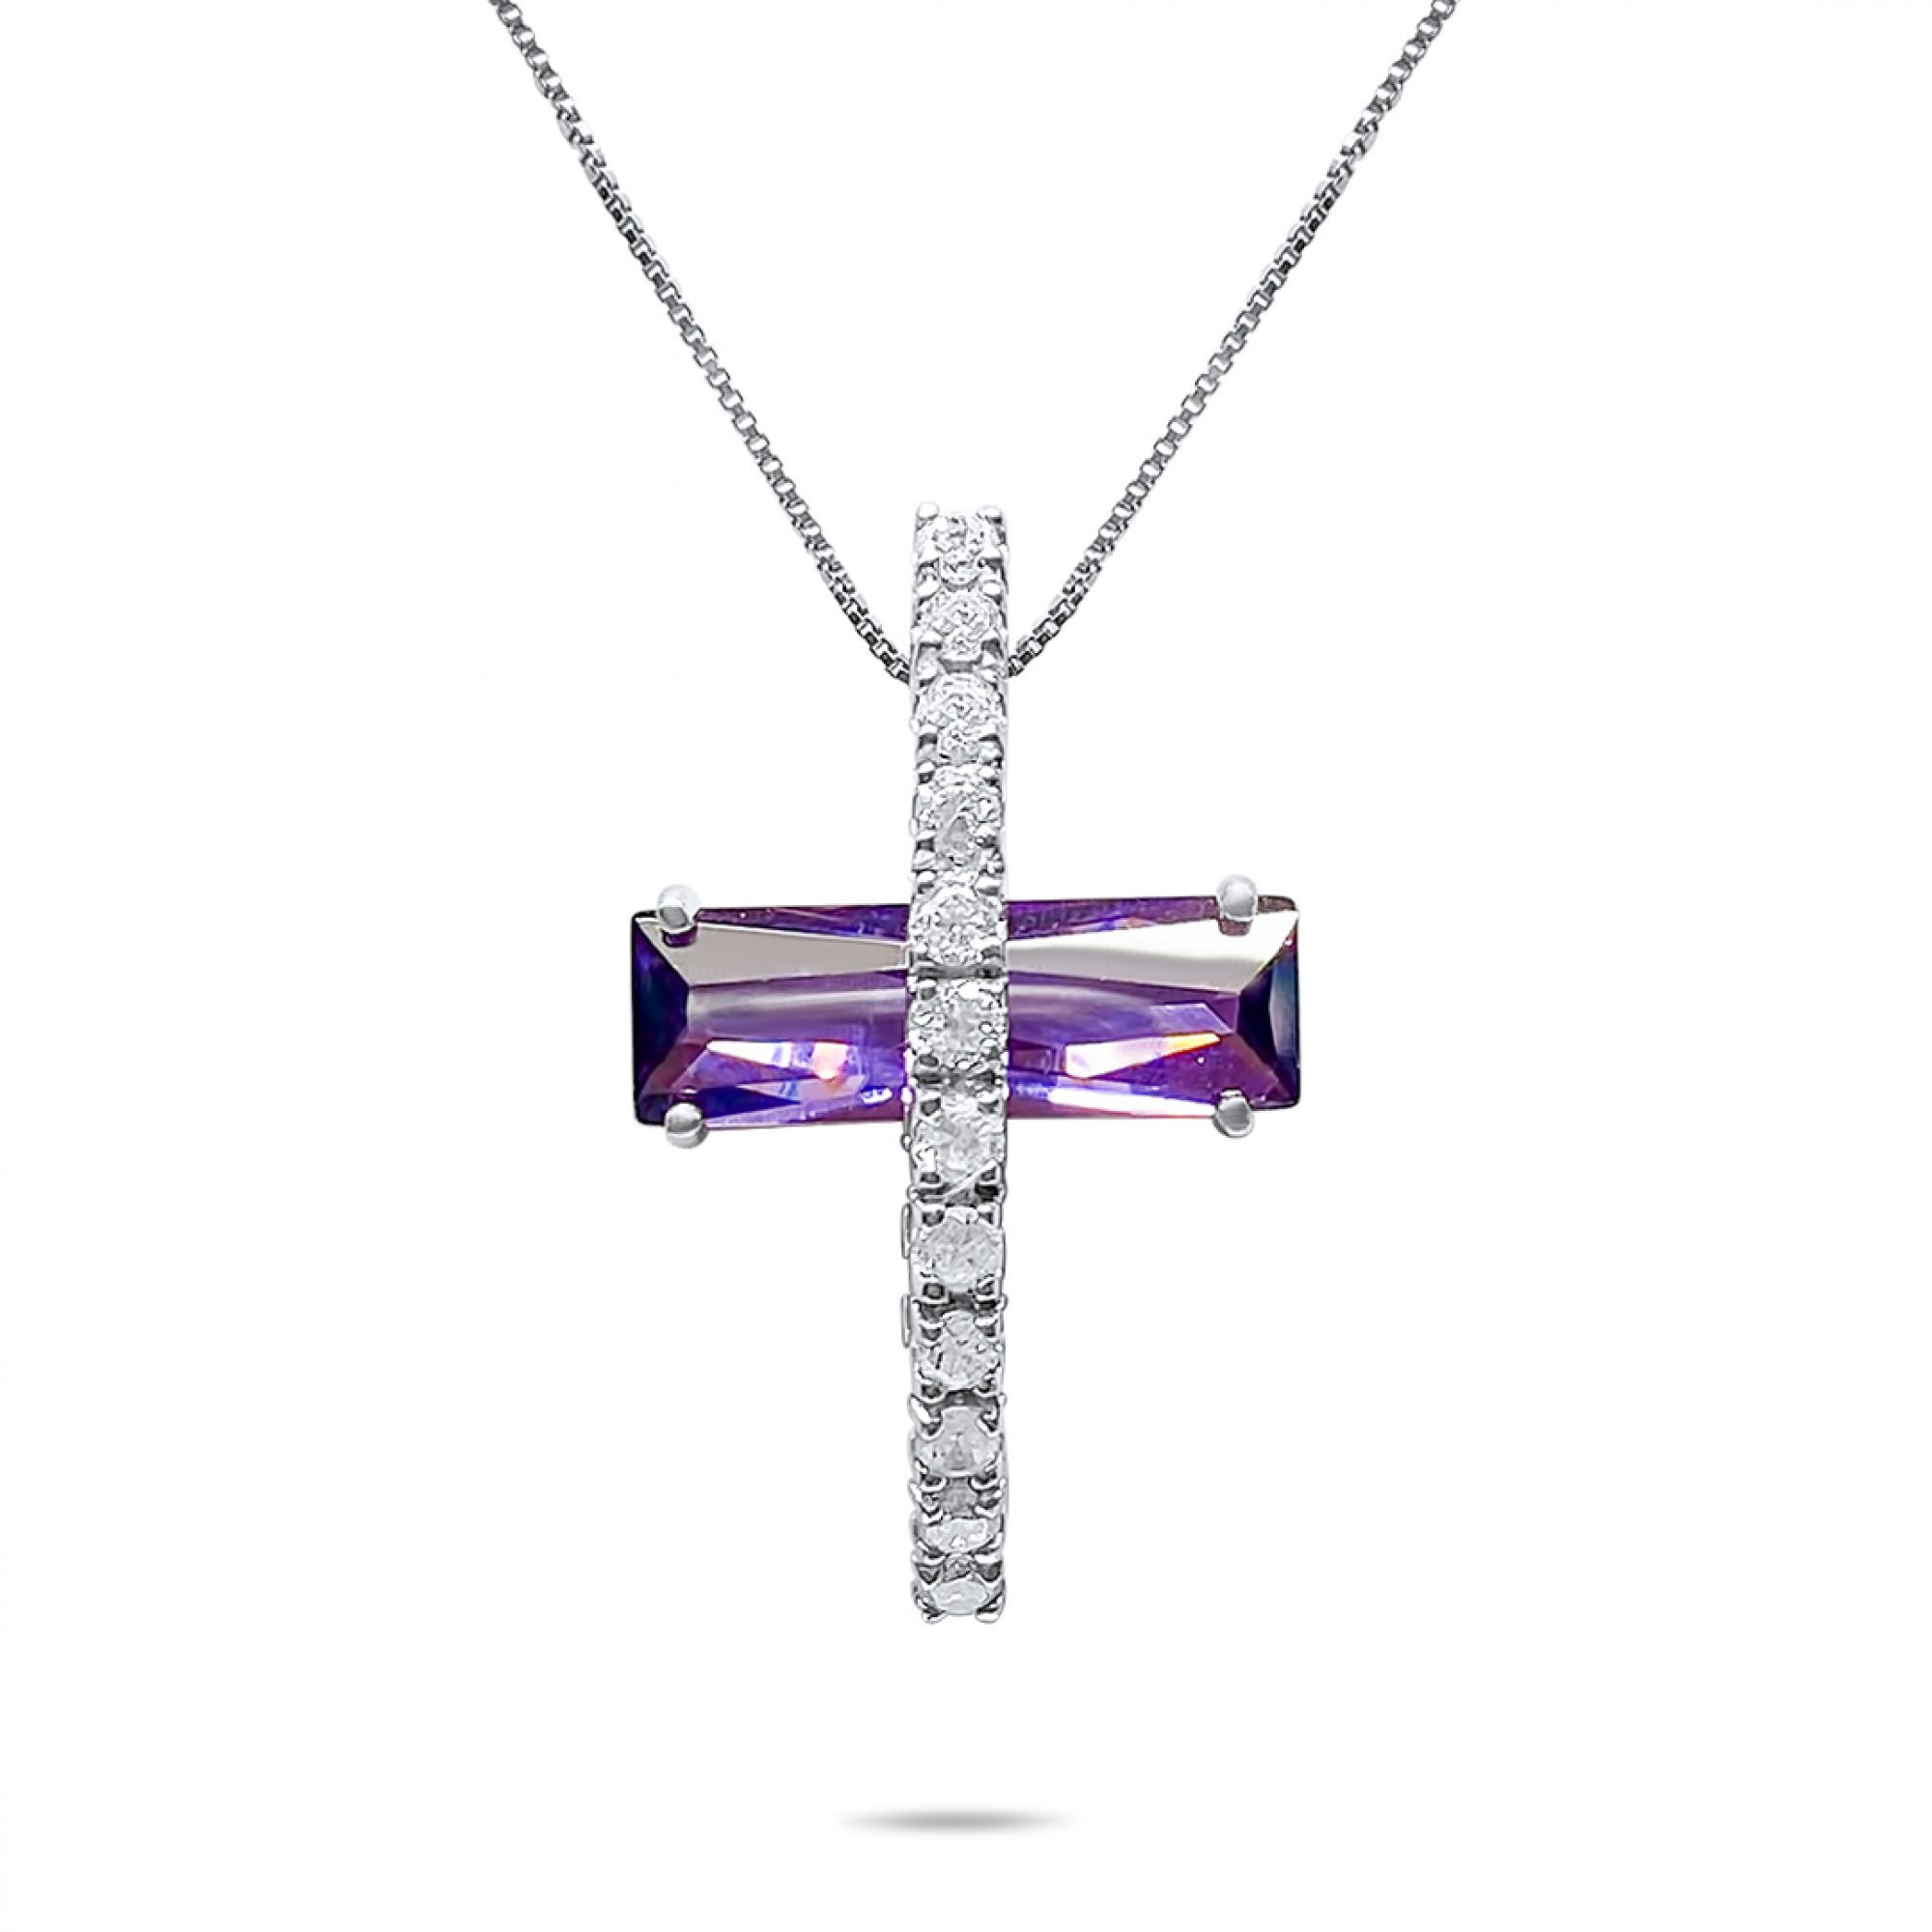 Cross necklace with amethyst and zircon stones